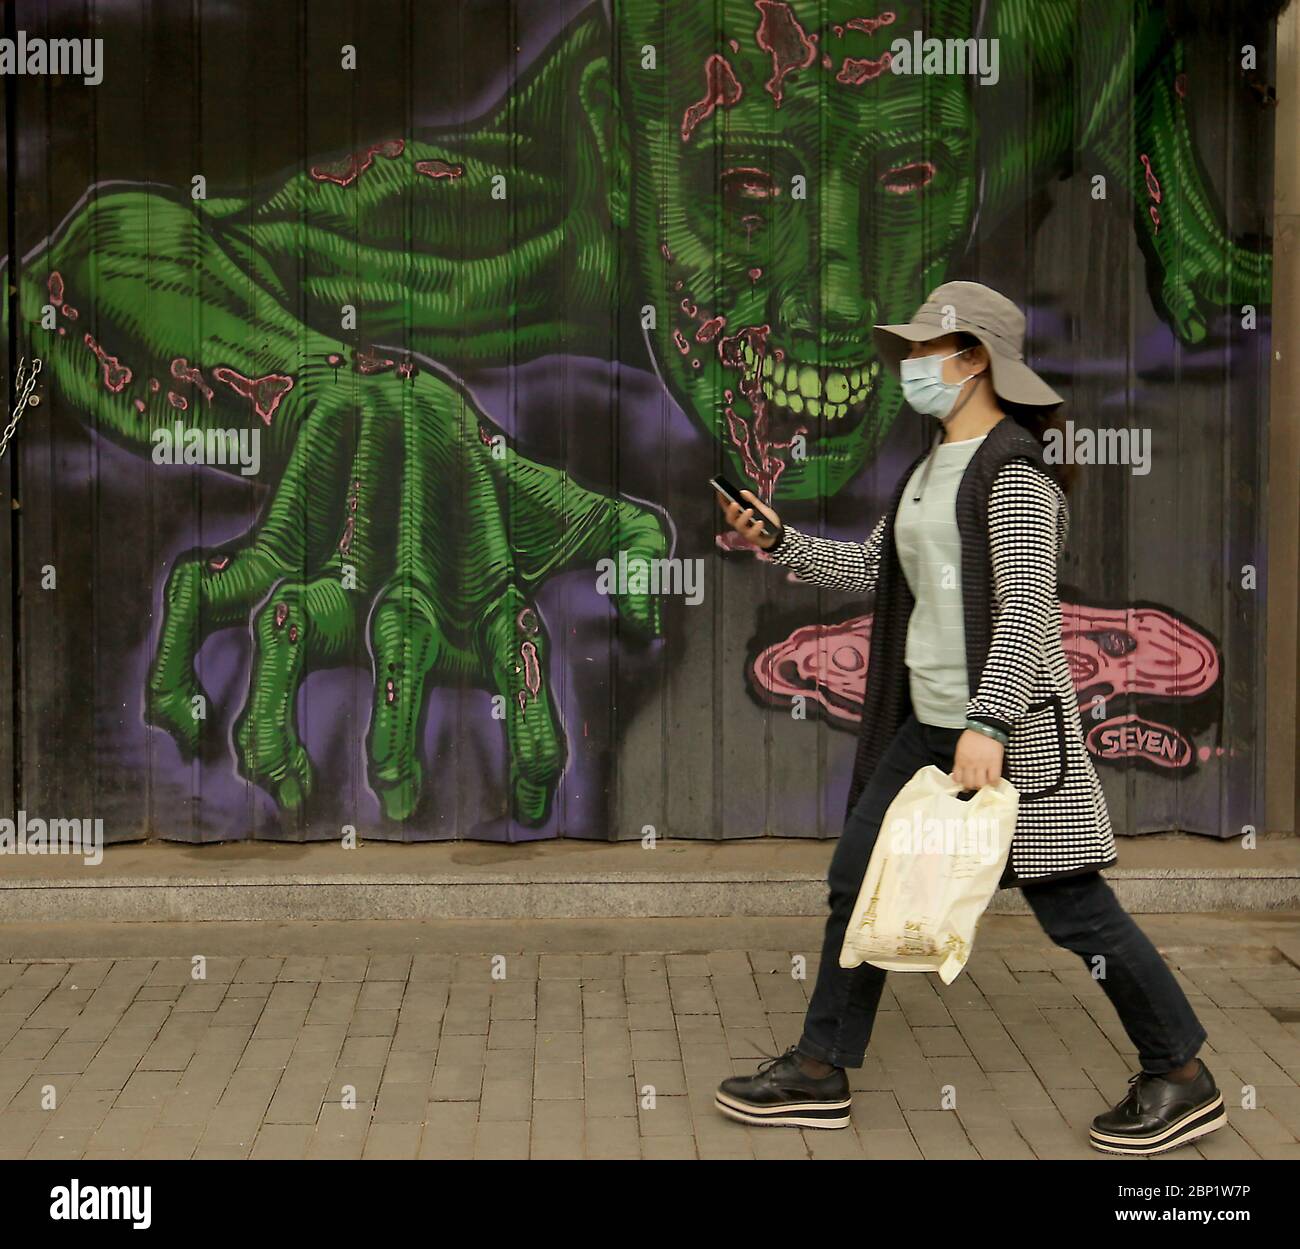 Beijing, China. 17th May, 2020. Chinese continue wearing protective face masks outside as the coronavirus pandemic threat continues in Beijing on Sunday, May 17, 2020. Wuhan, a city of 11 million, where the Covid-19 pandemic originated, reported new cases over the weekend, its first new infections in over a month. China is aggressively investigating the new cluster, announcing a plan to test the entire city in 10 days. Photo by Stephen Shaver/UPI Credit: UPI/Alamy Live News Stock Photo